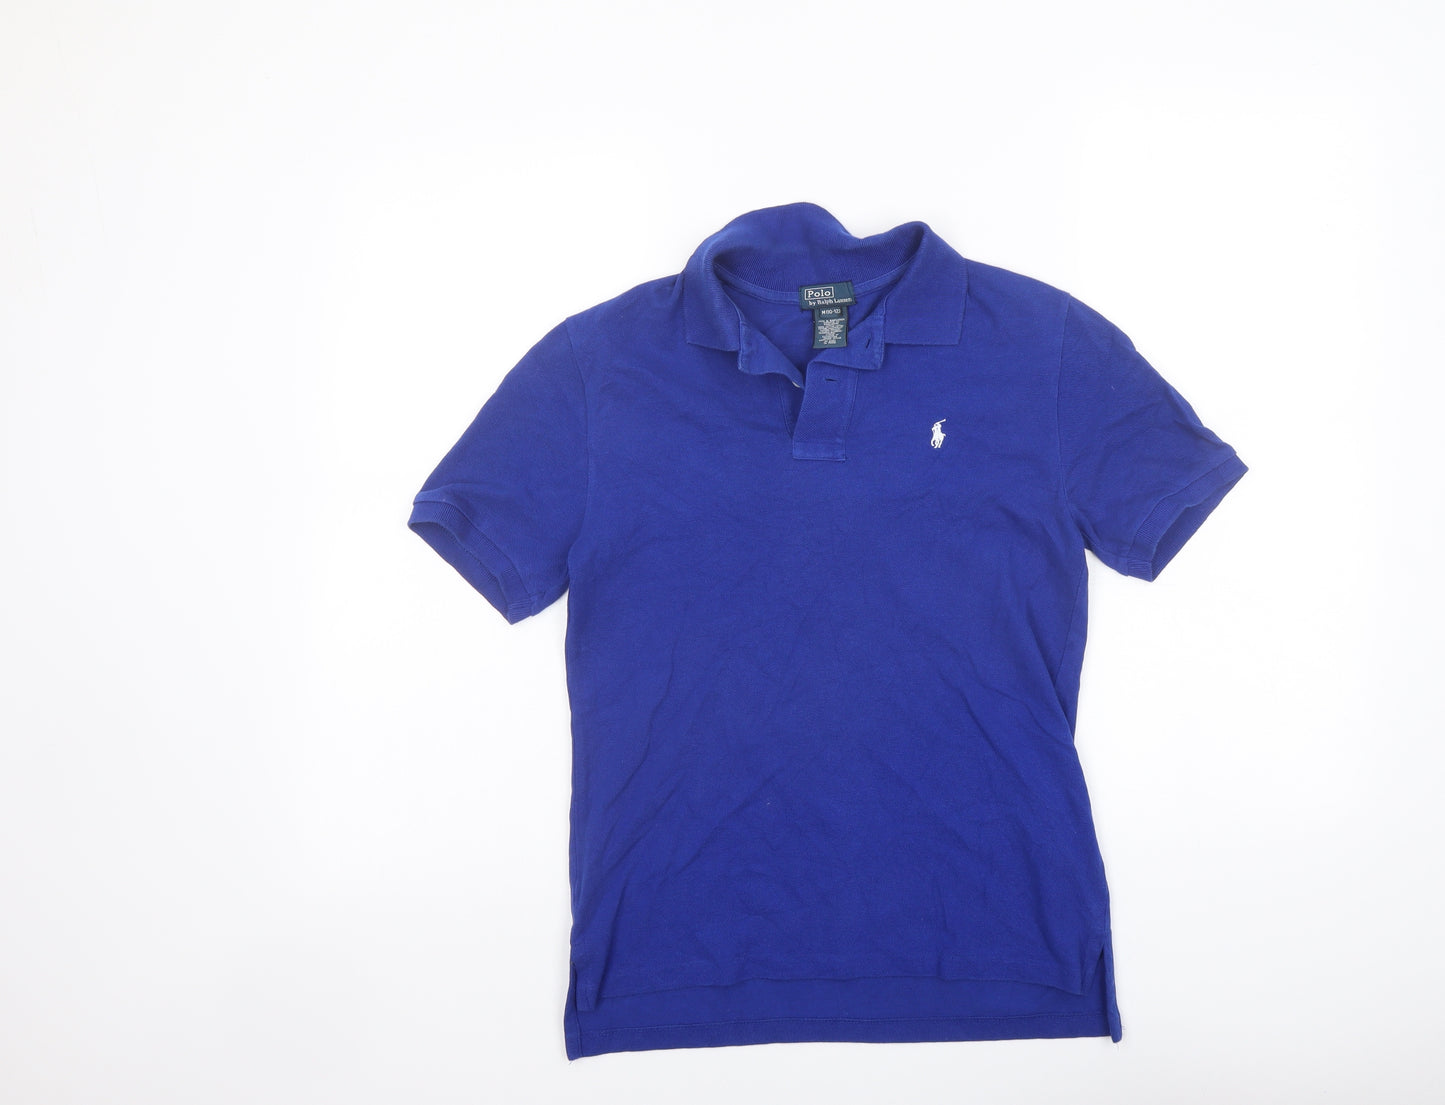 Polo Ralph Lauren Womens Blue Cotton Basic Polo Size 10 Collared - Size 10-12